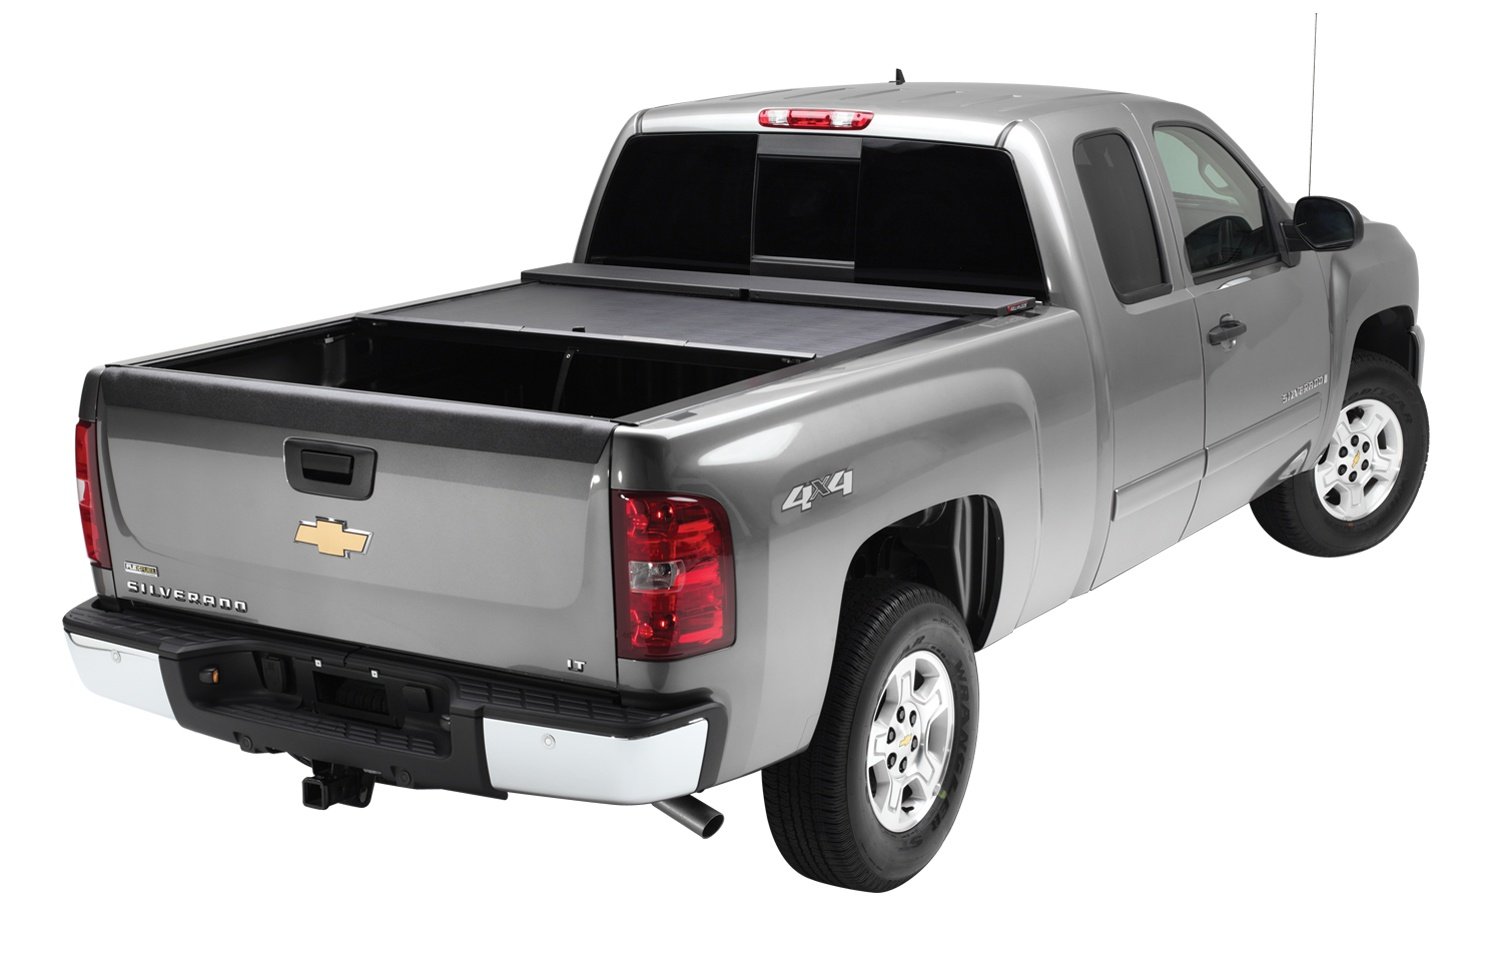 LG207M M-Series Locking Retractable Truck Bed Cover for 2007-2013 GM Silverado/Sierra [6.6 ft. Bed]